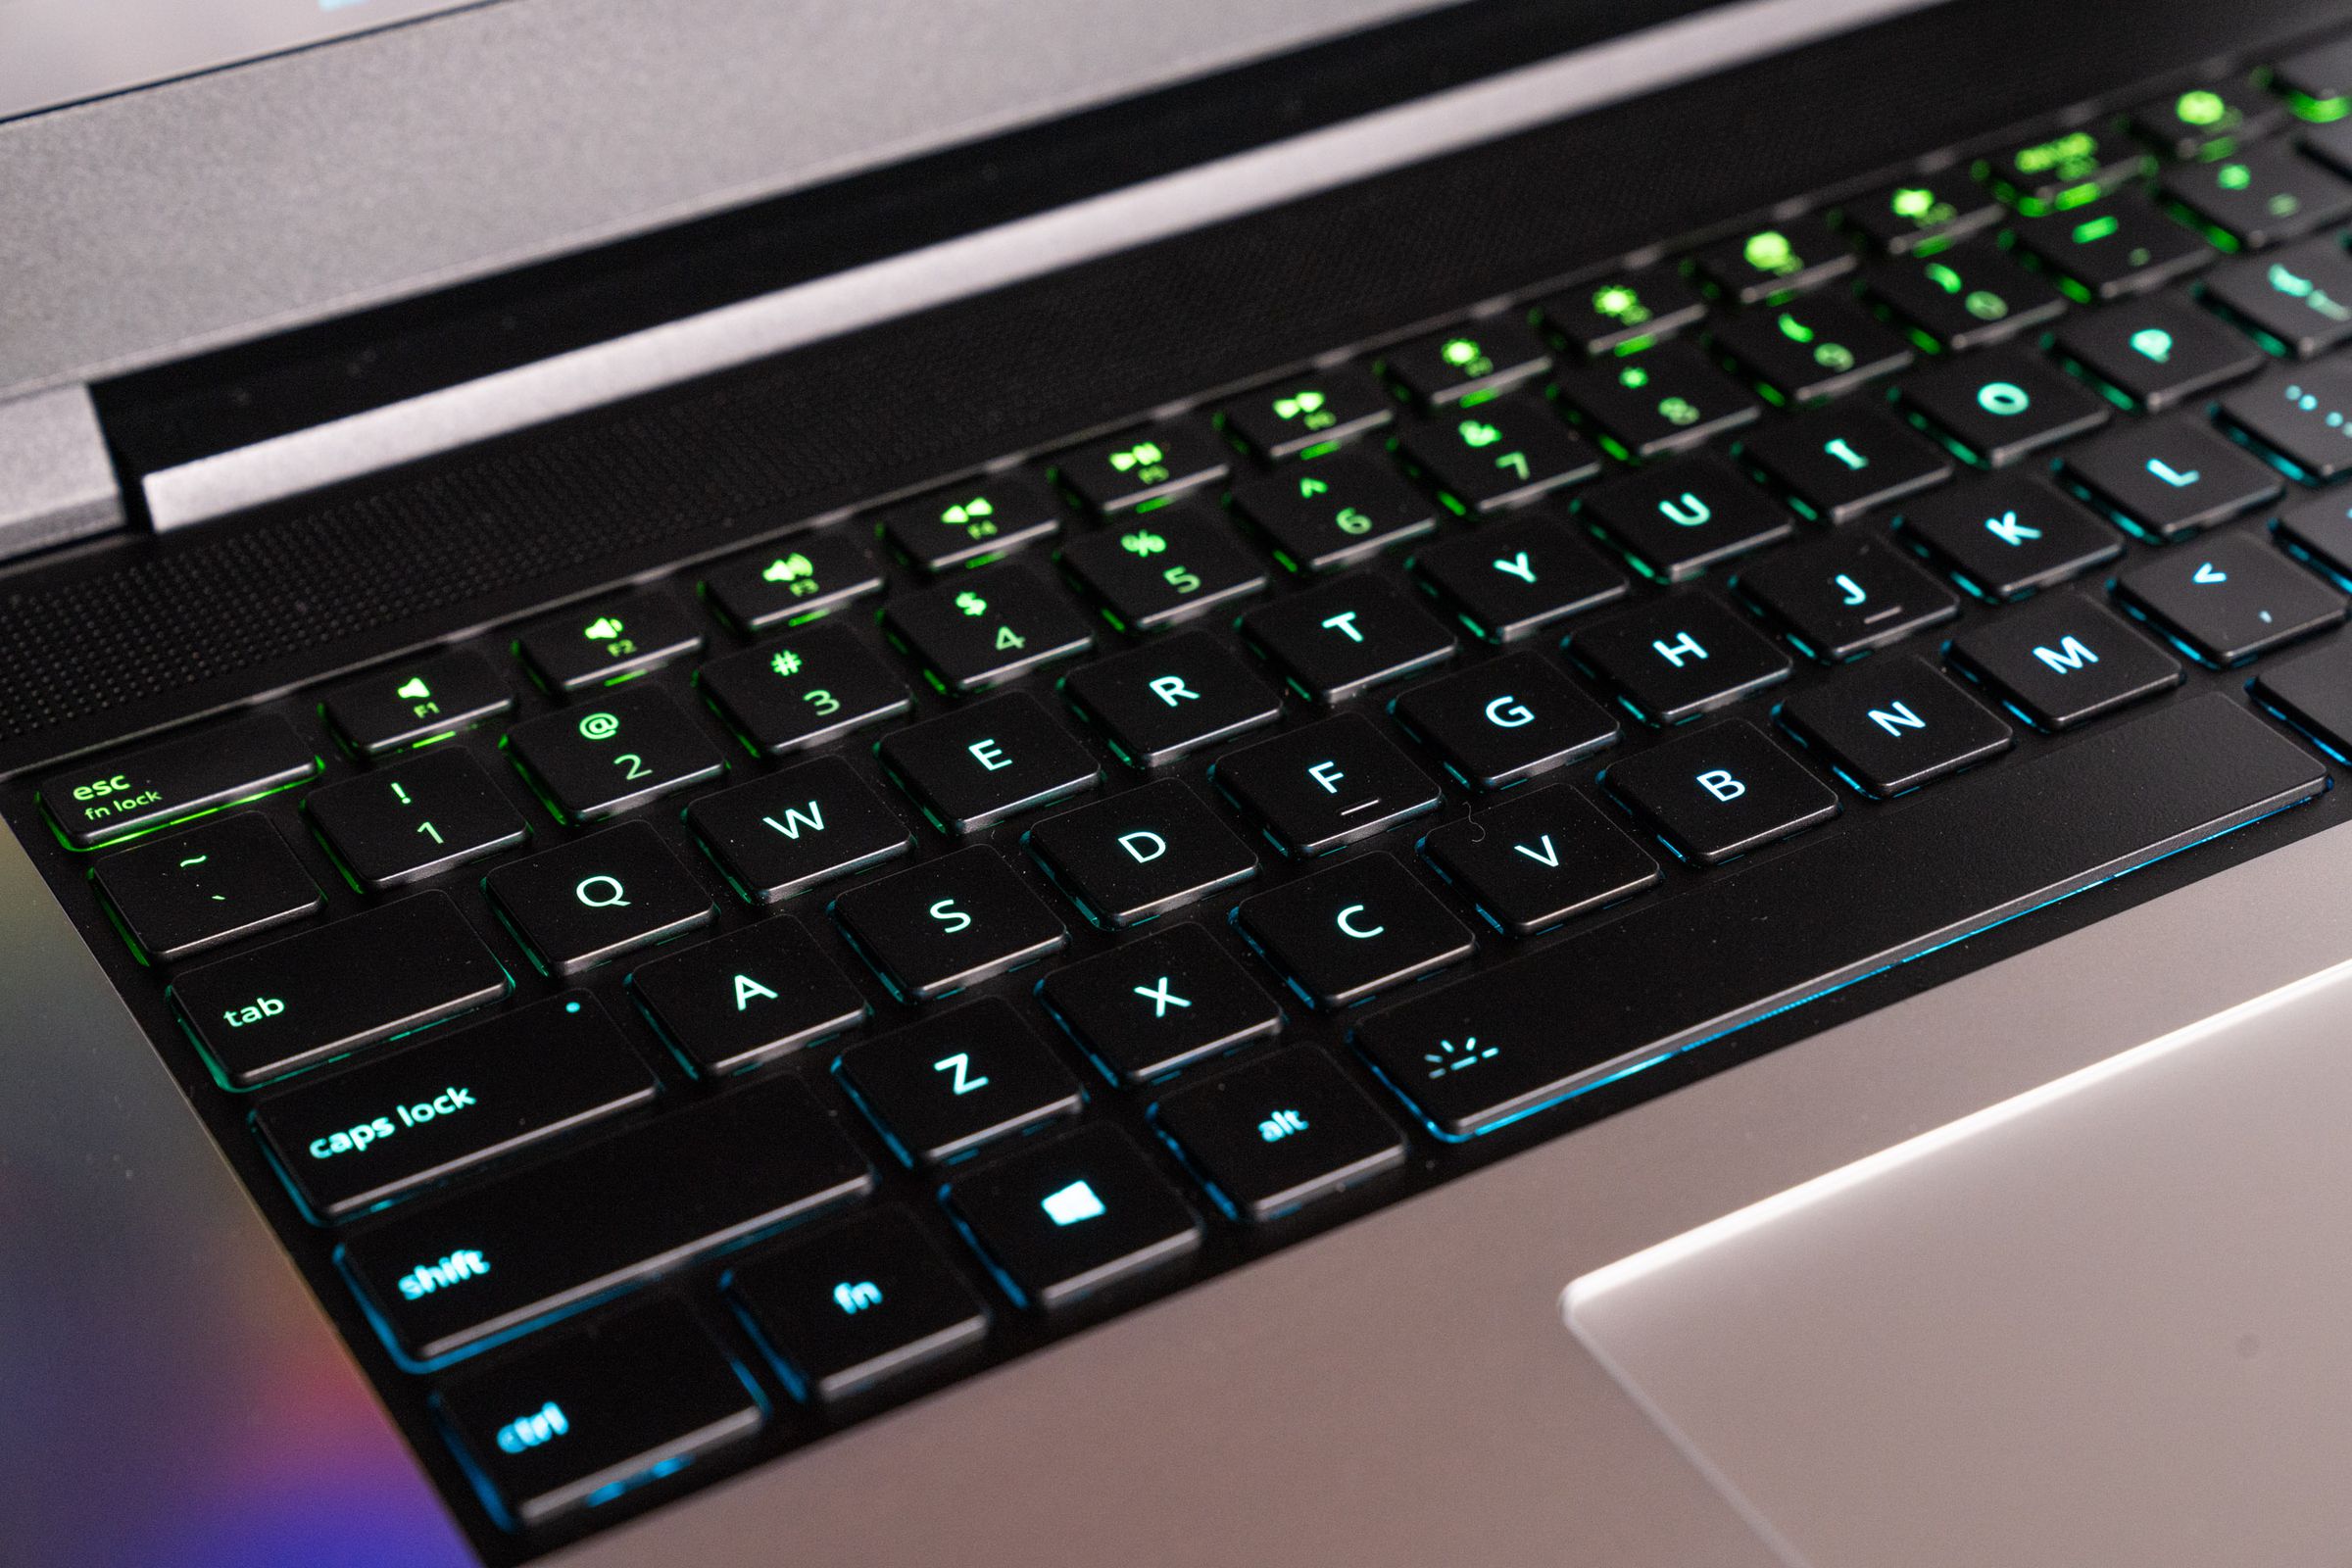 I would definitely spring for the RGB keyboard.